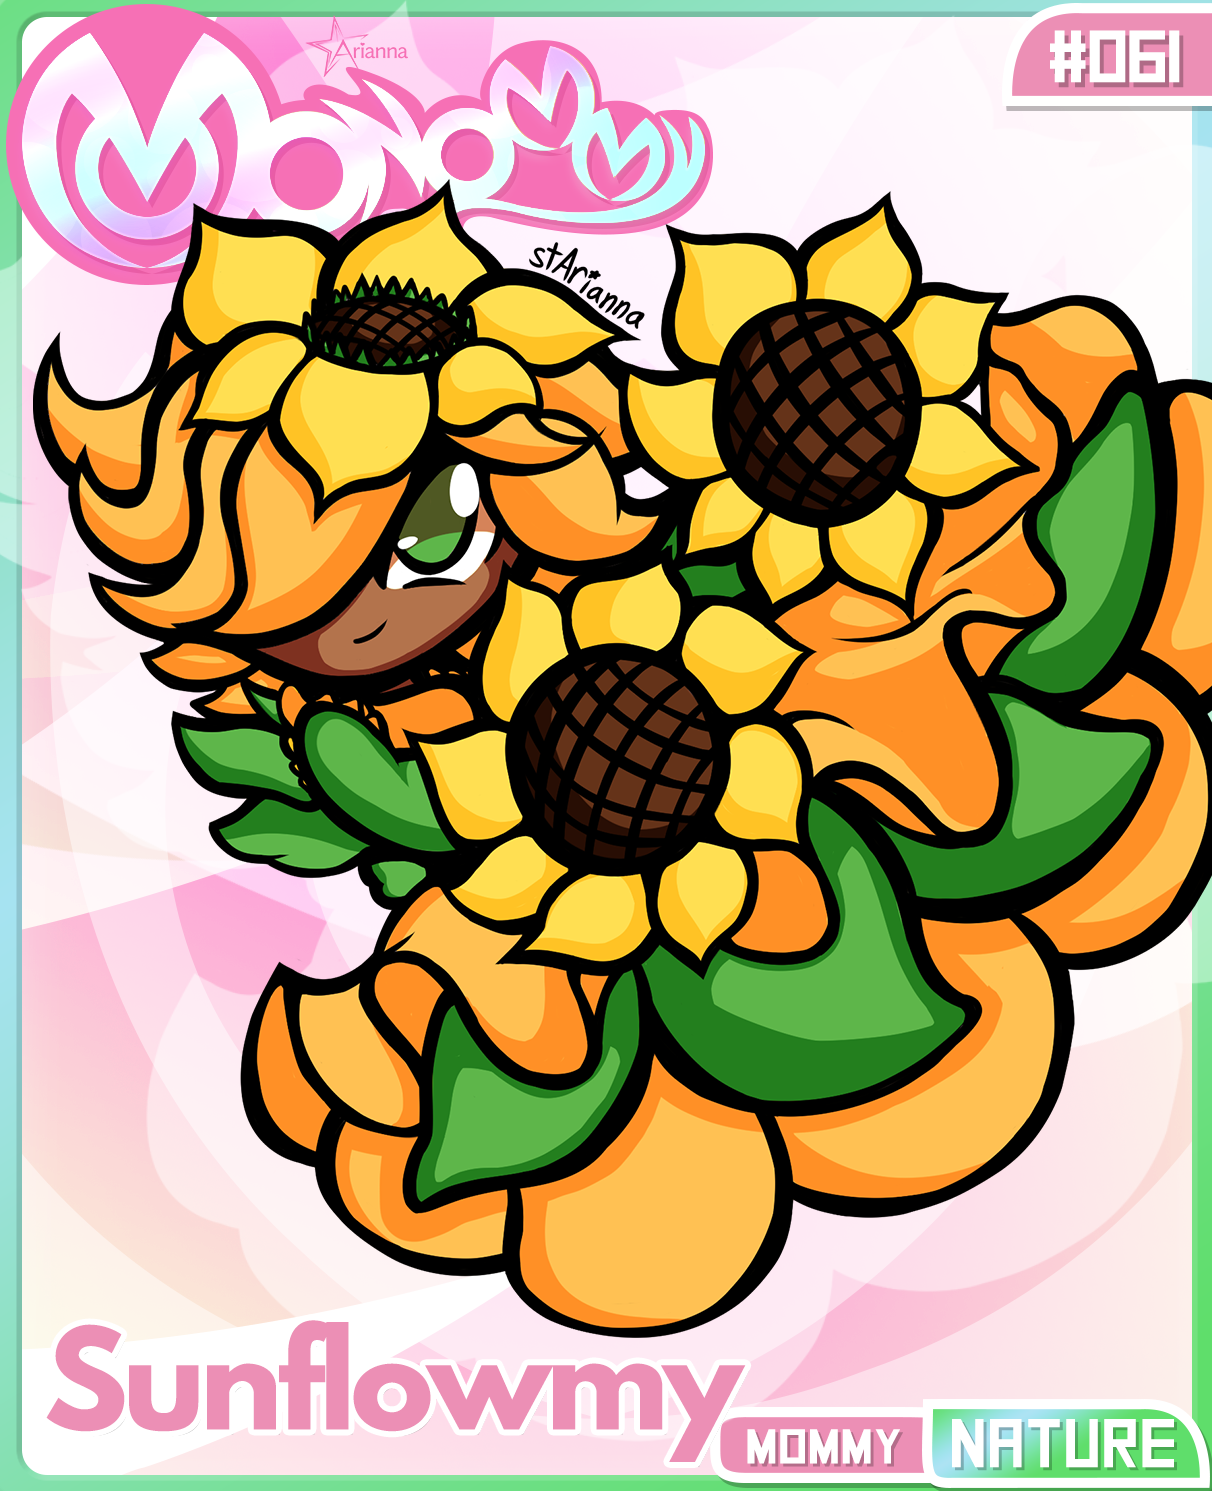 Sunflowmy, Monommy #061, a mommy class nature-type